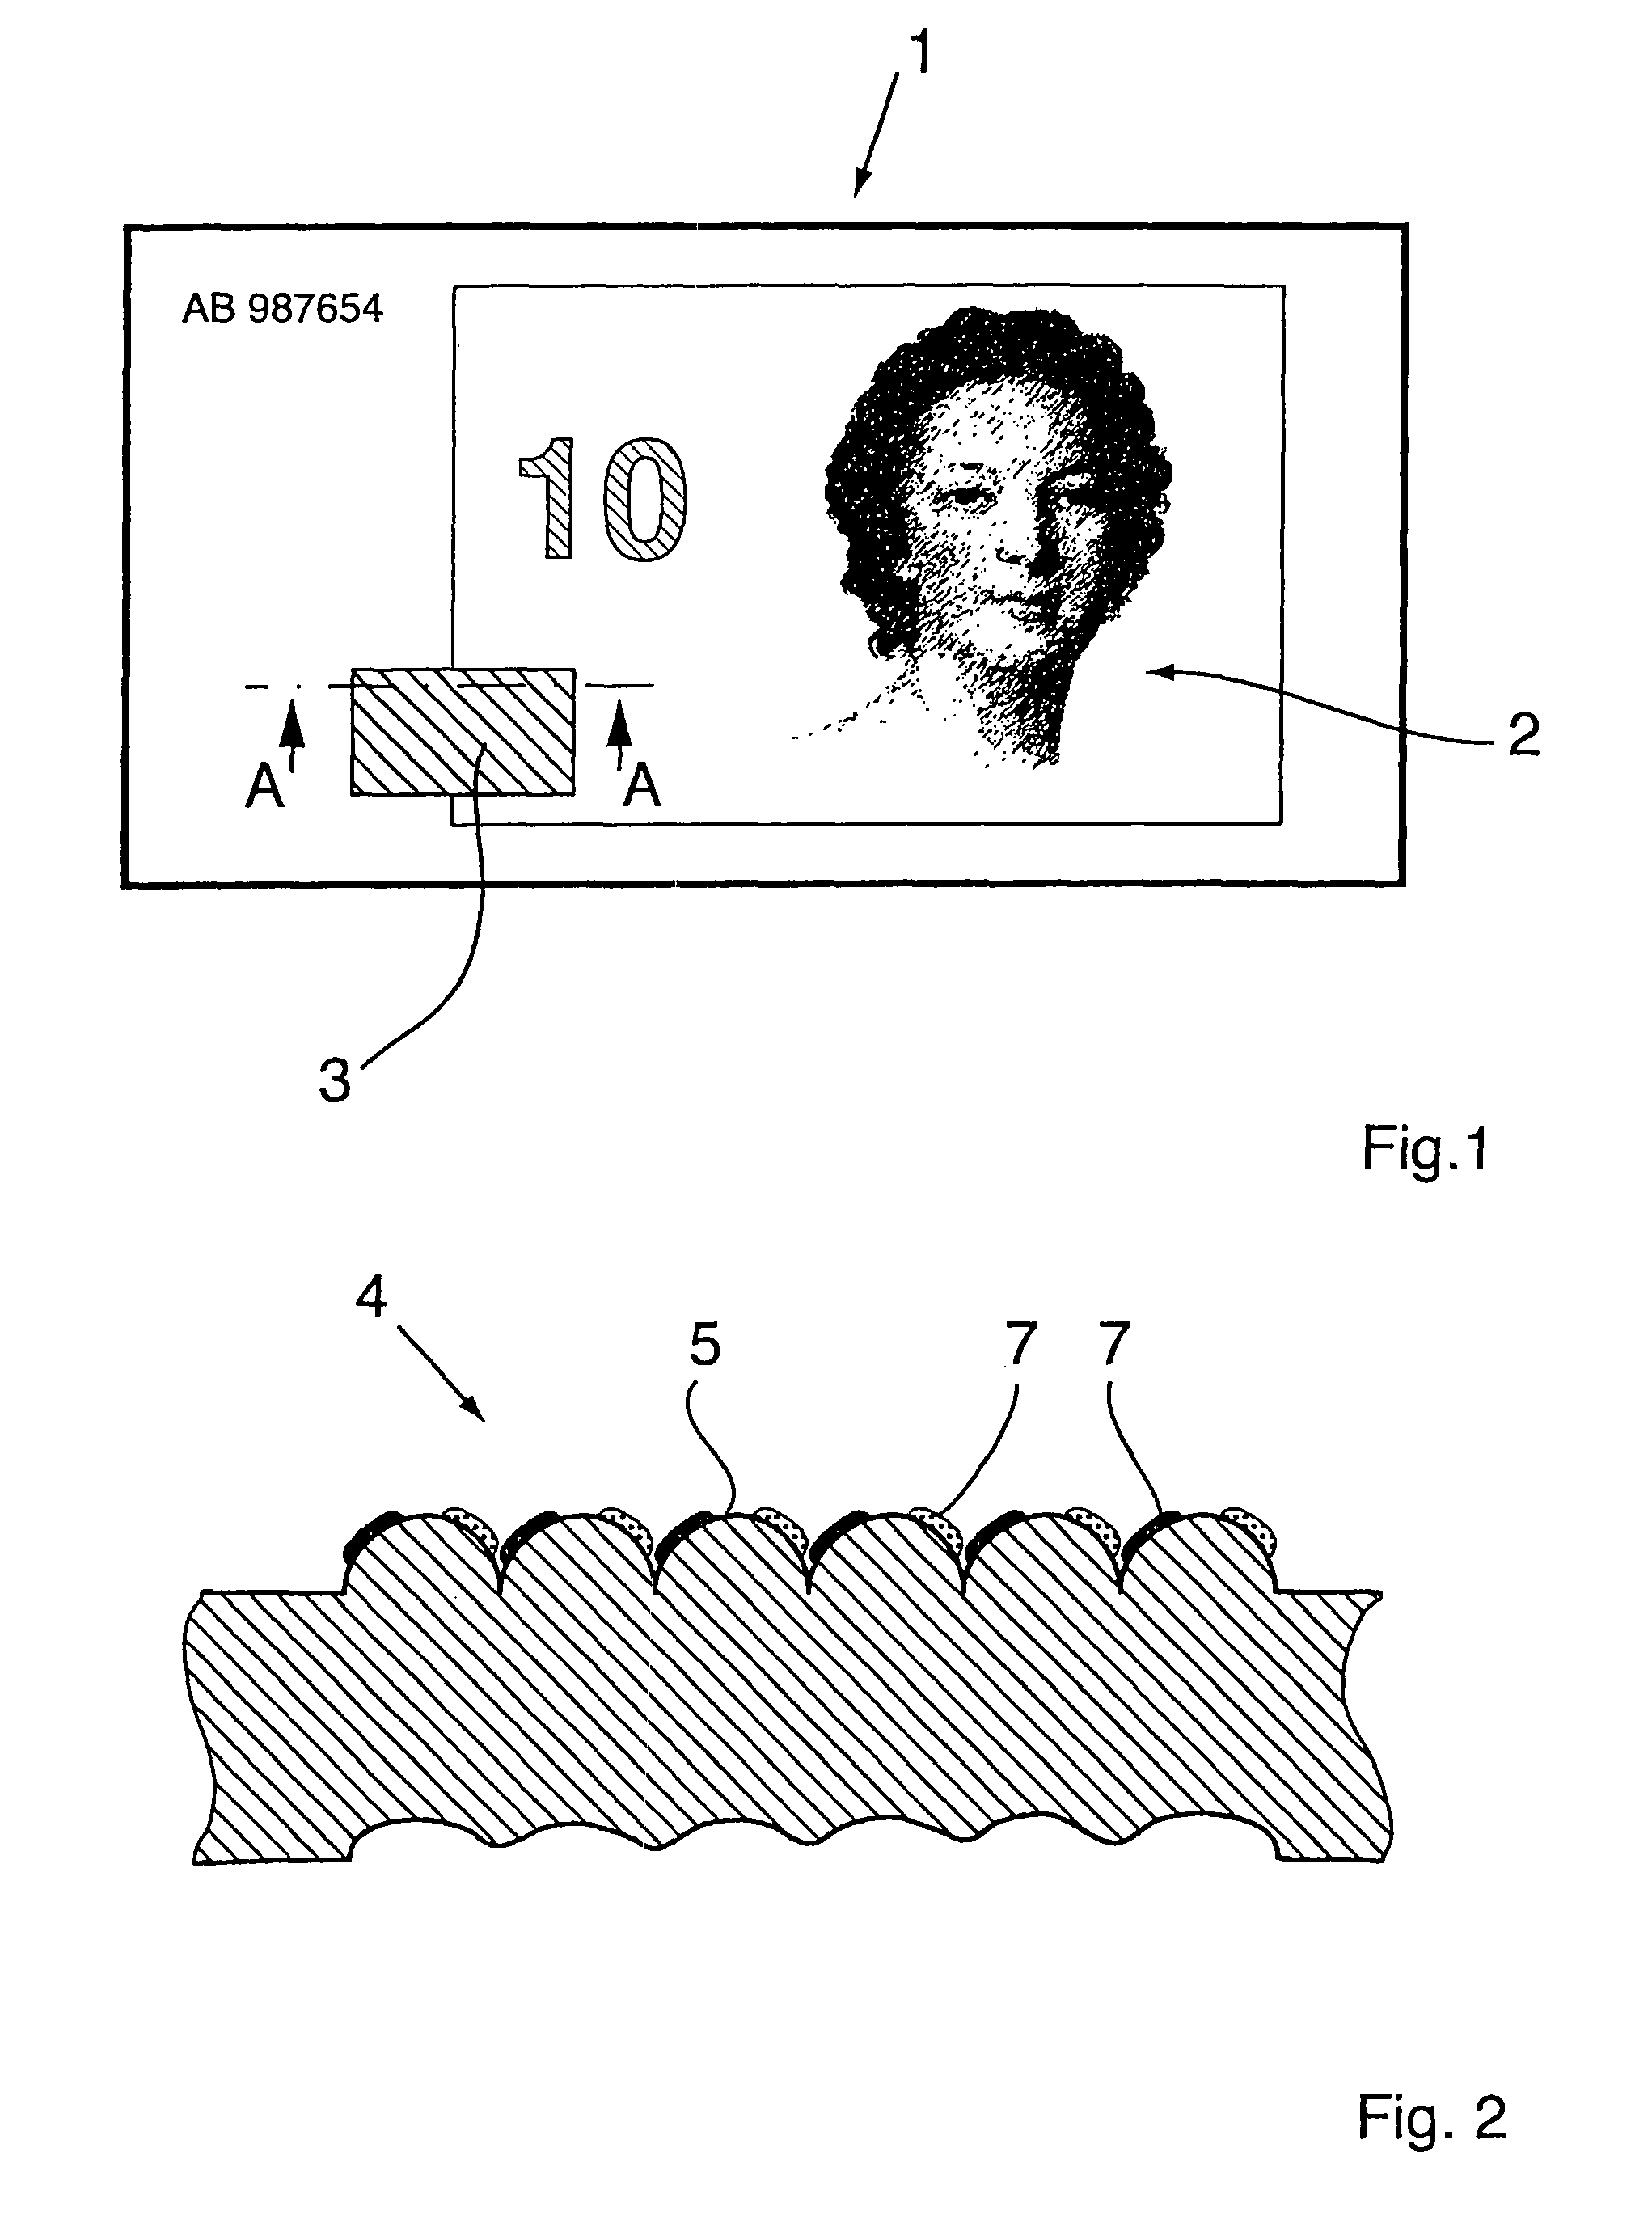 Data support with an optically variable structure